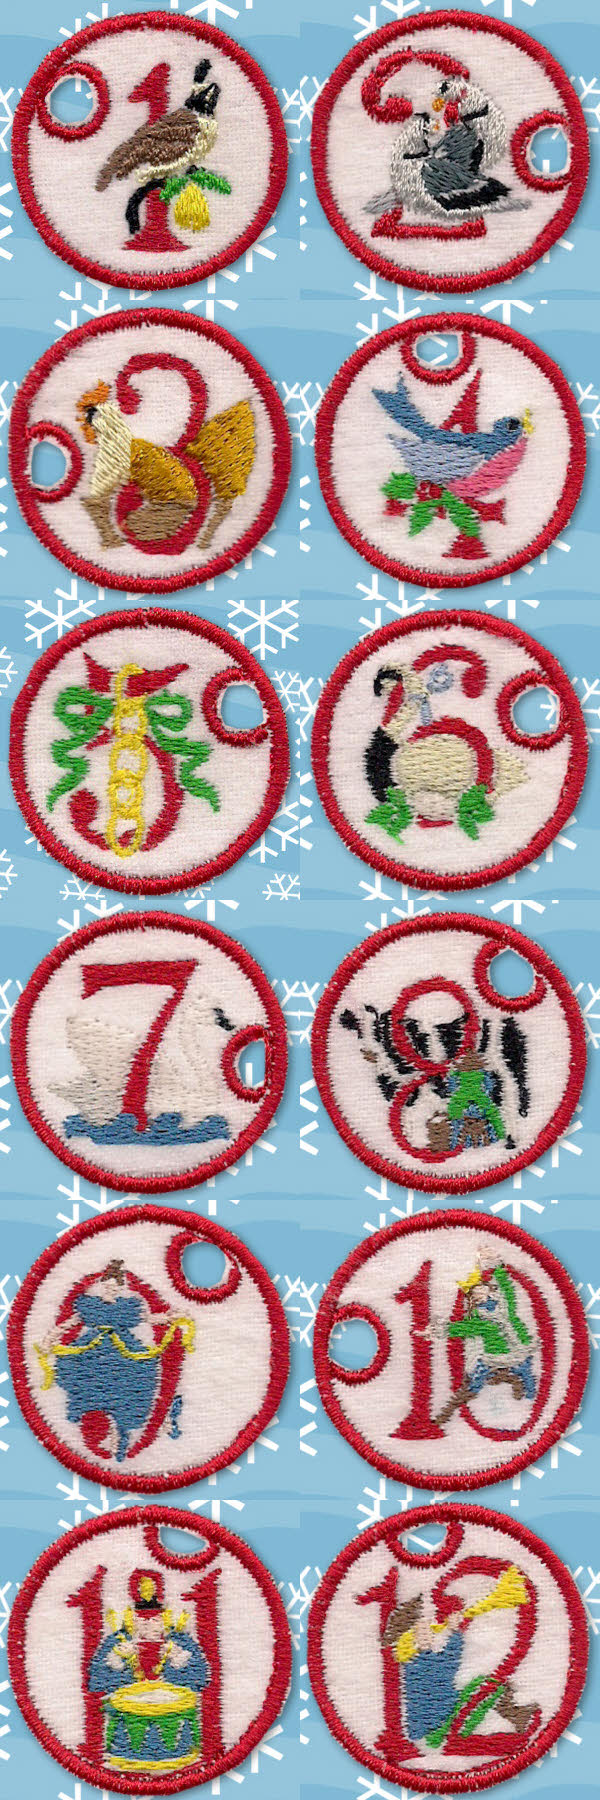 12 Days of Christmas Charms Embroidery Machine Design Details